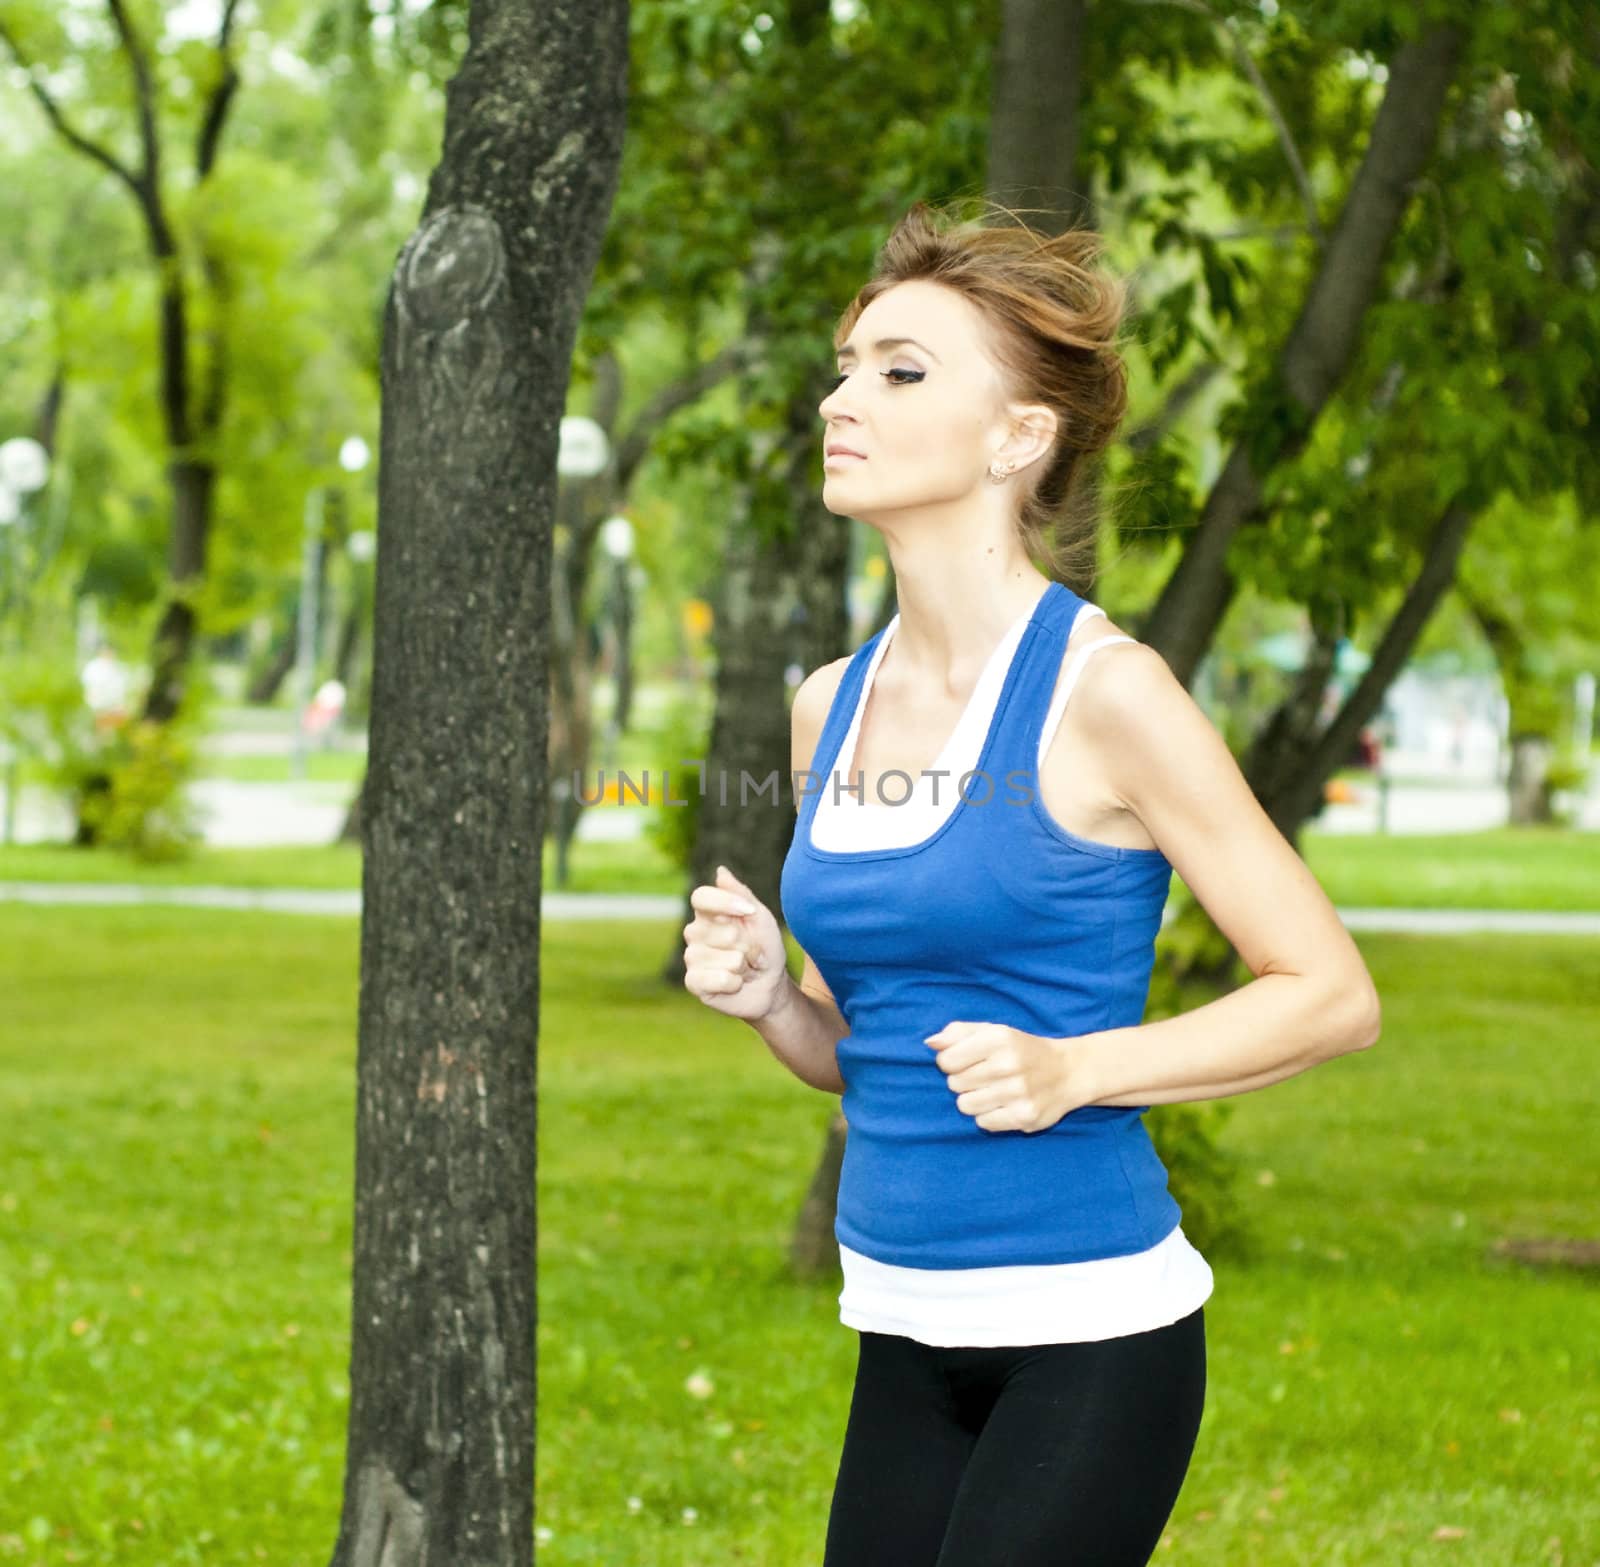 young woman jogging in the park in summer by adam121